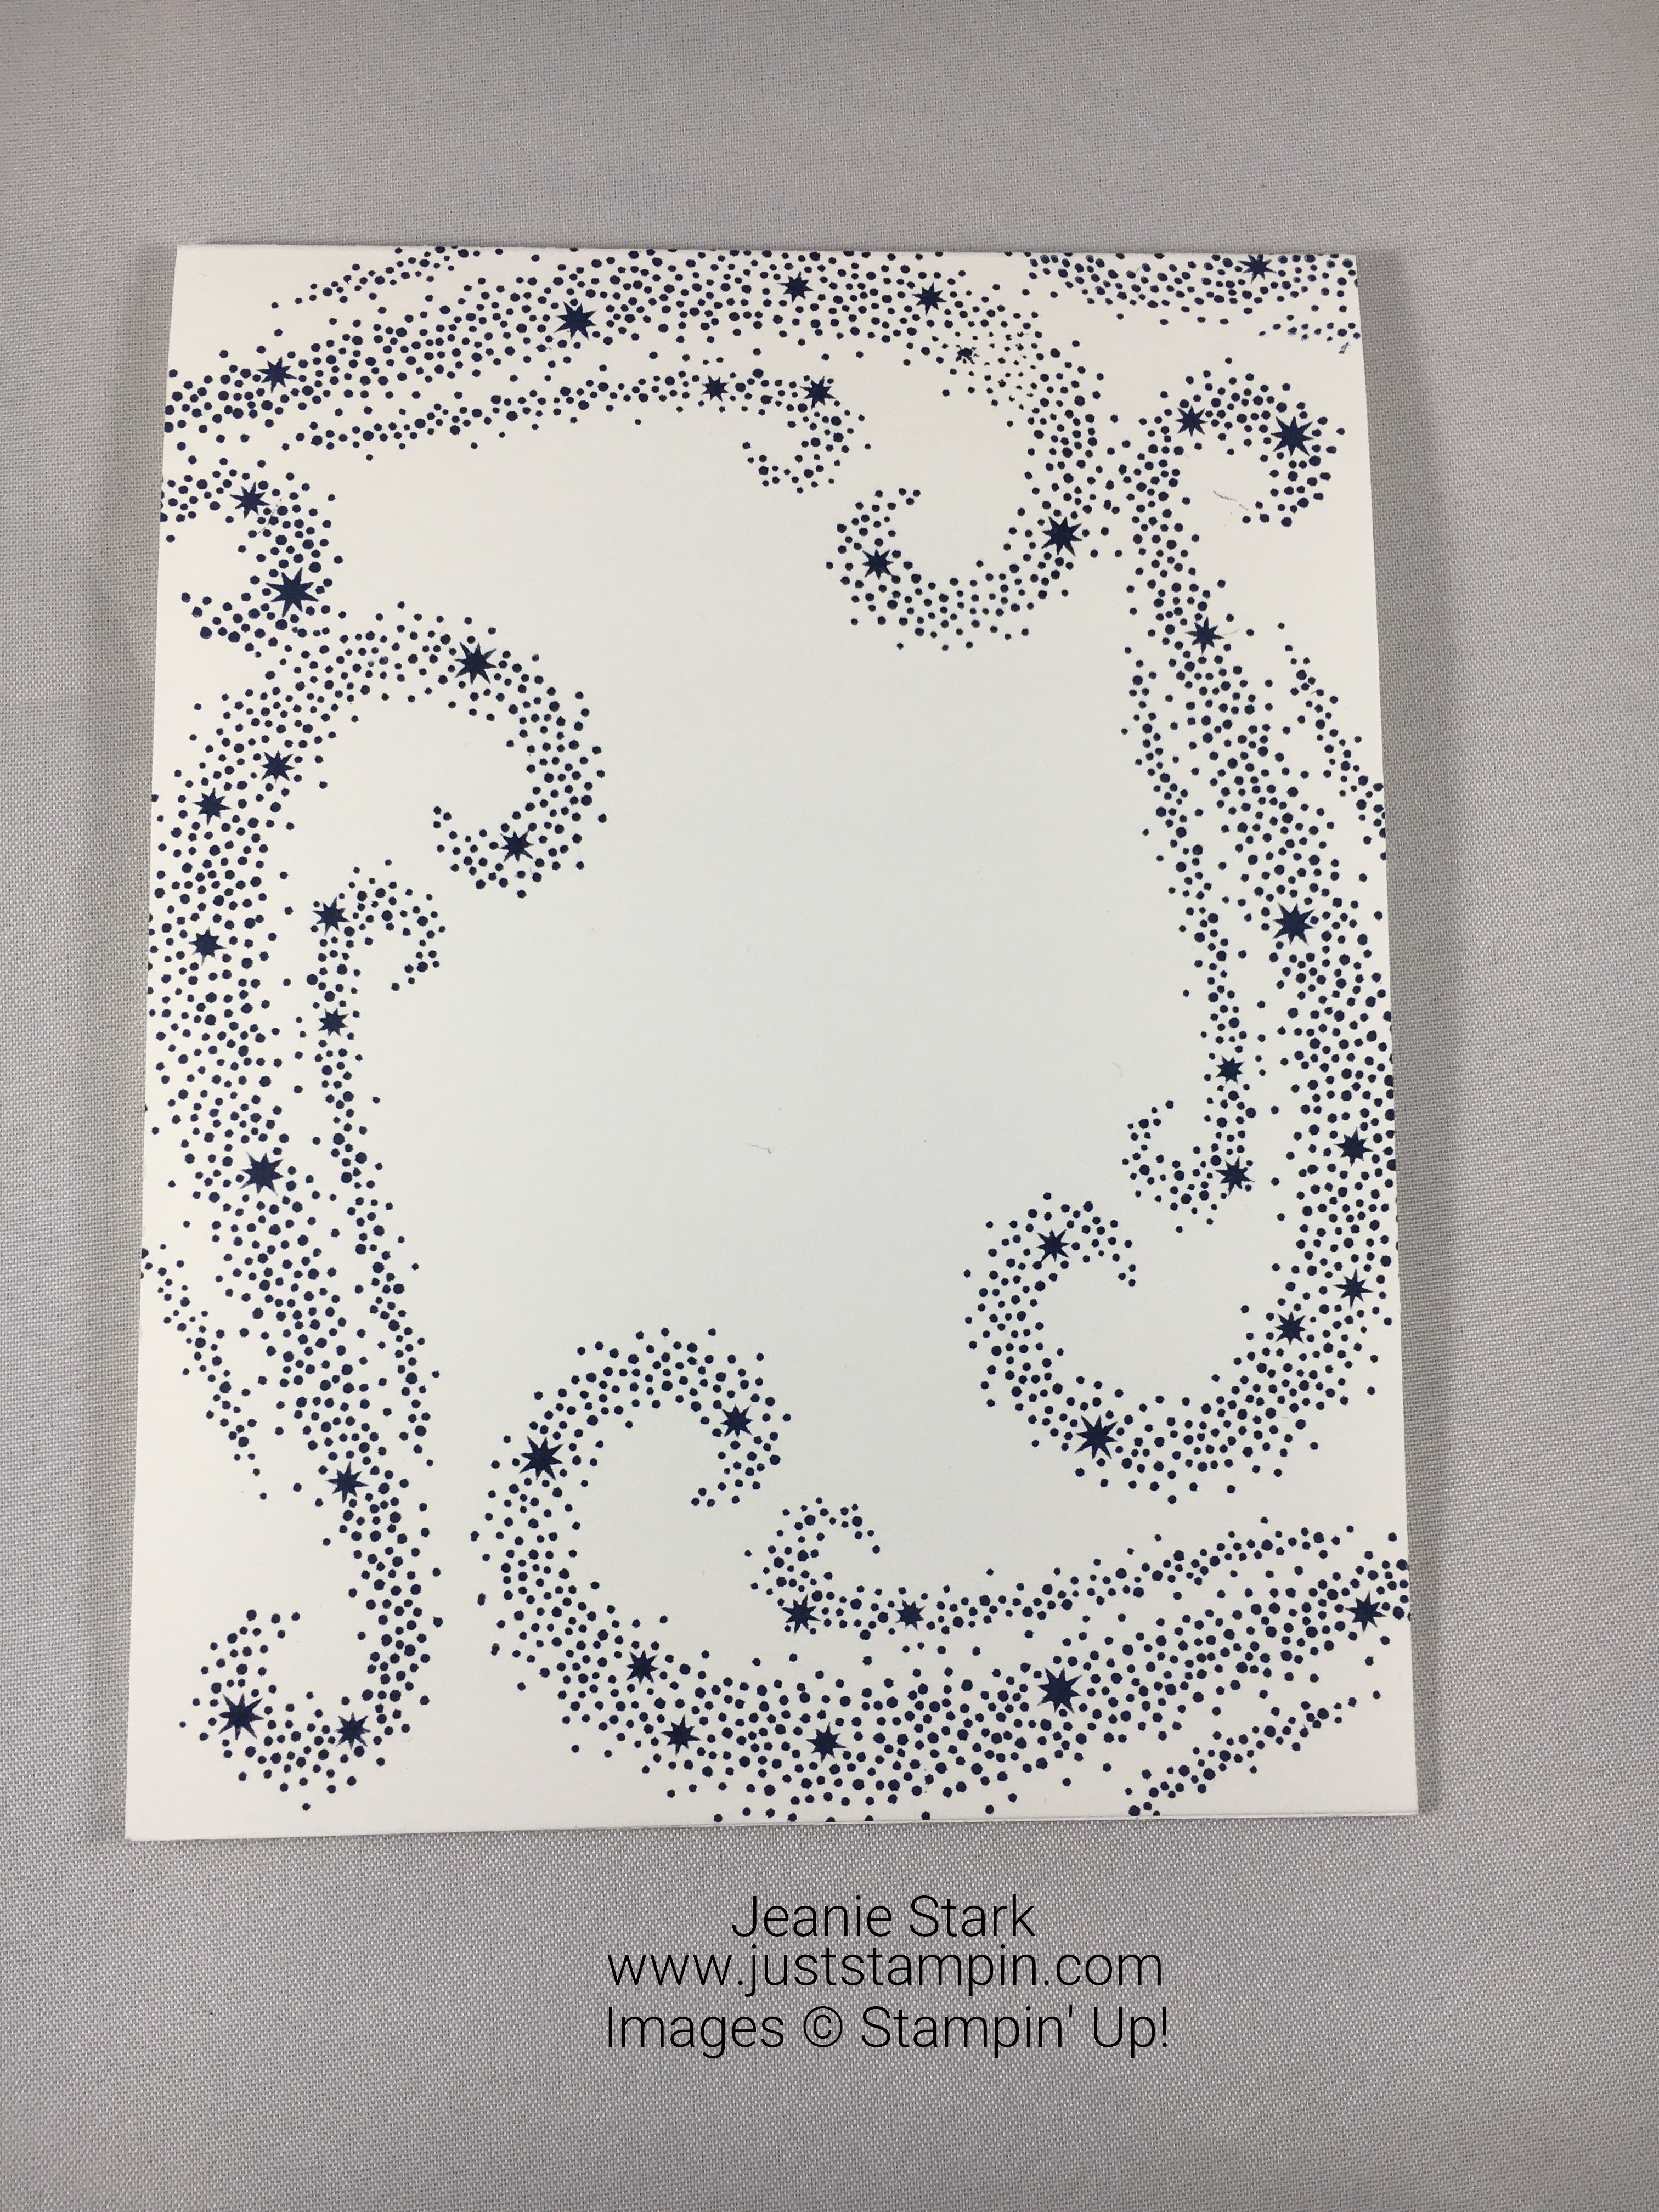 Stampin Up Star of Light Christmas card idea - Jeanie Stark StampinUp